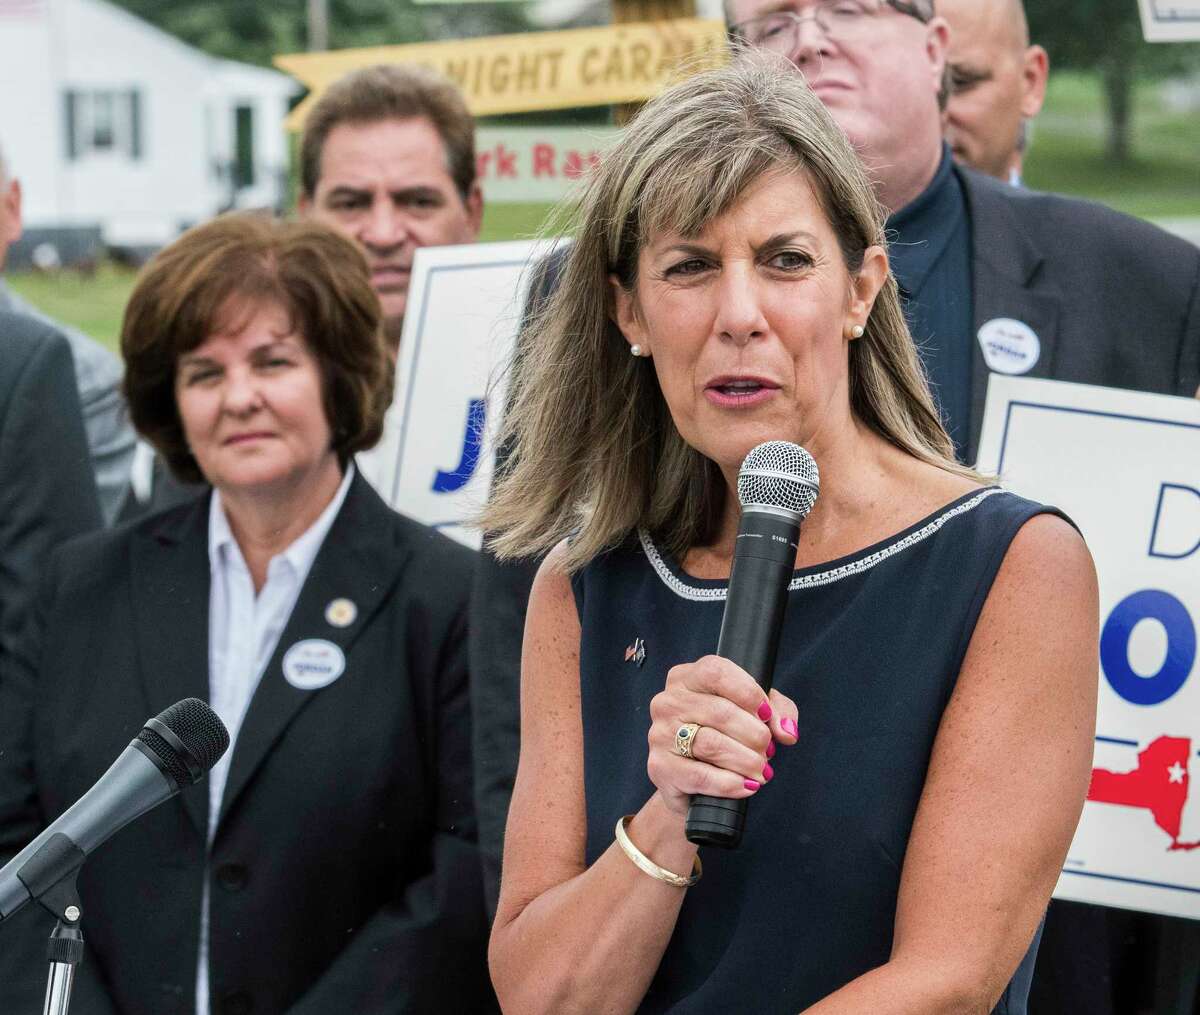 As Senator Kathy Marchione, left watched, Daphne Jordan announced her intention to run for the State Senate Thursday July 26, 2018 at Hayner's Food and Ice-cream shop in Halfmoon, N.Y. (Skip Dickstein/Times Union)